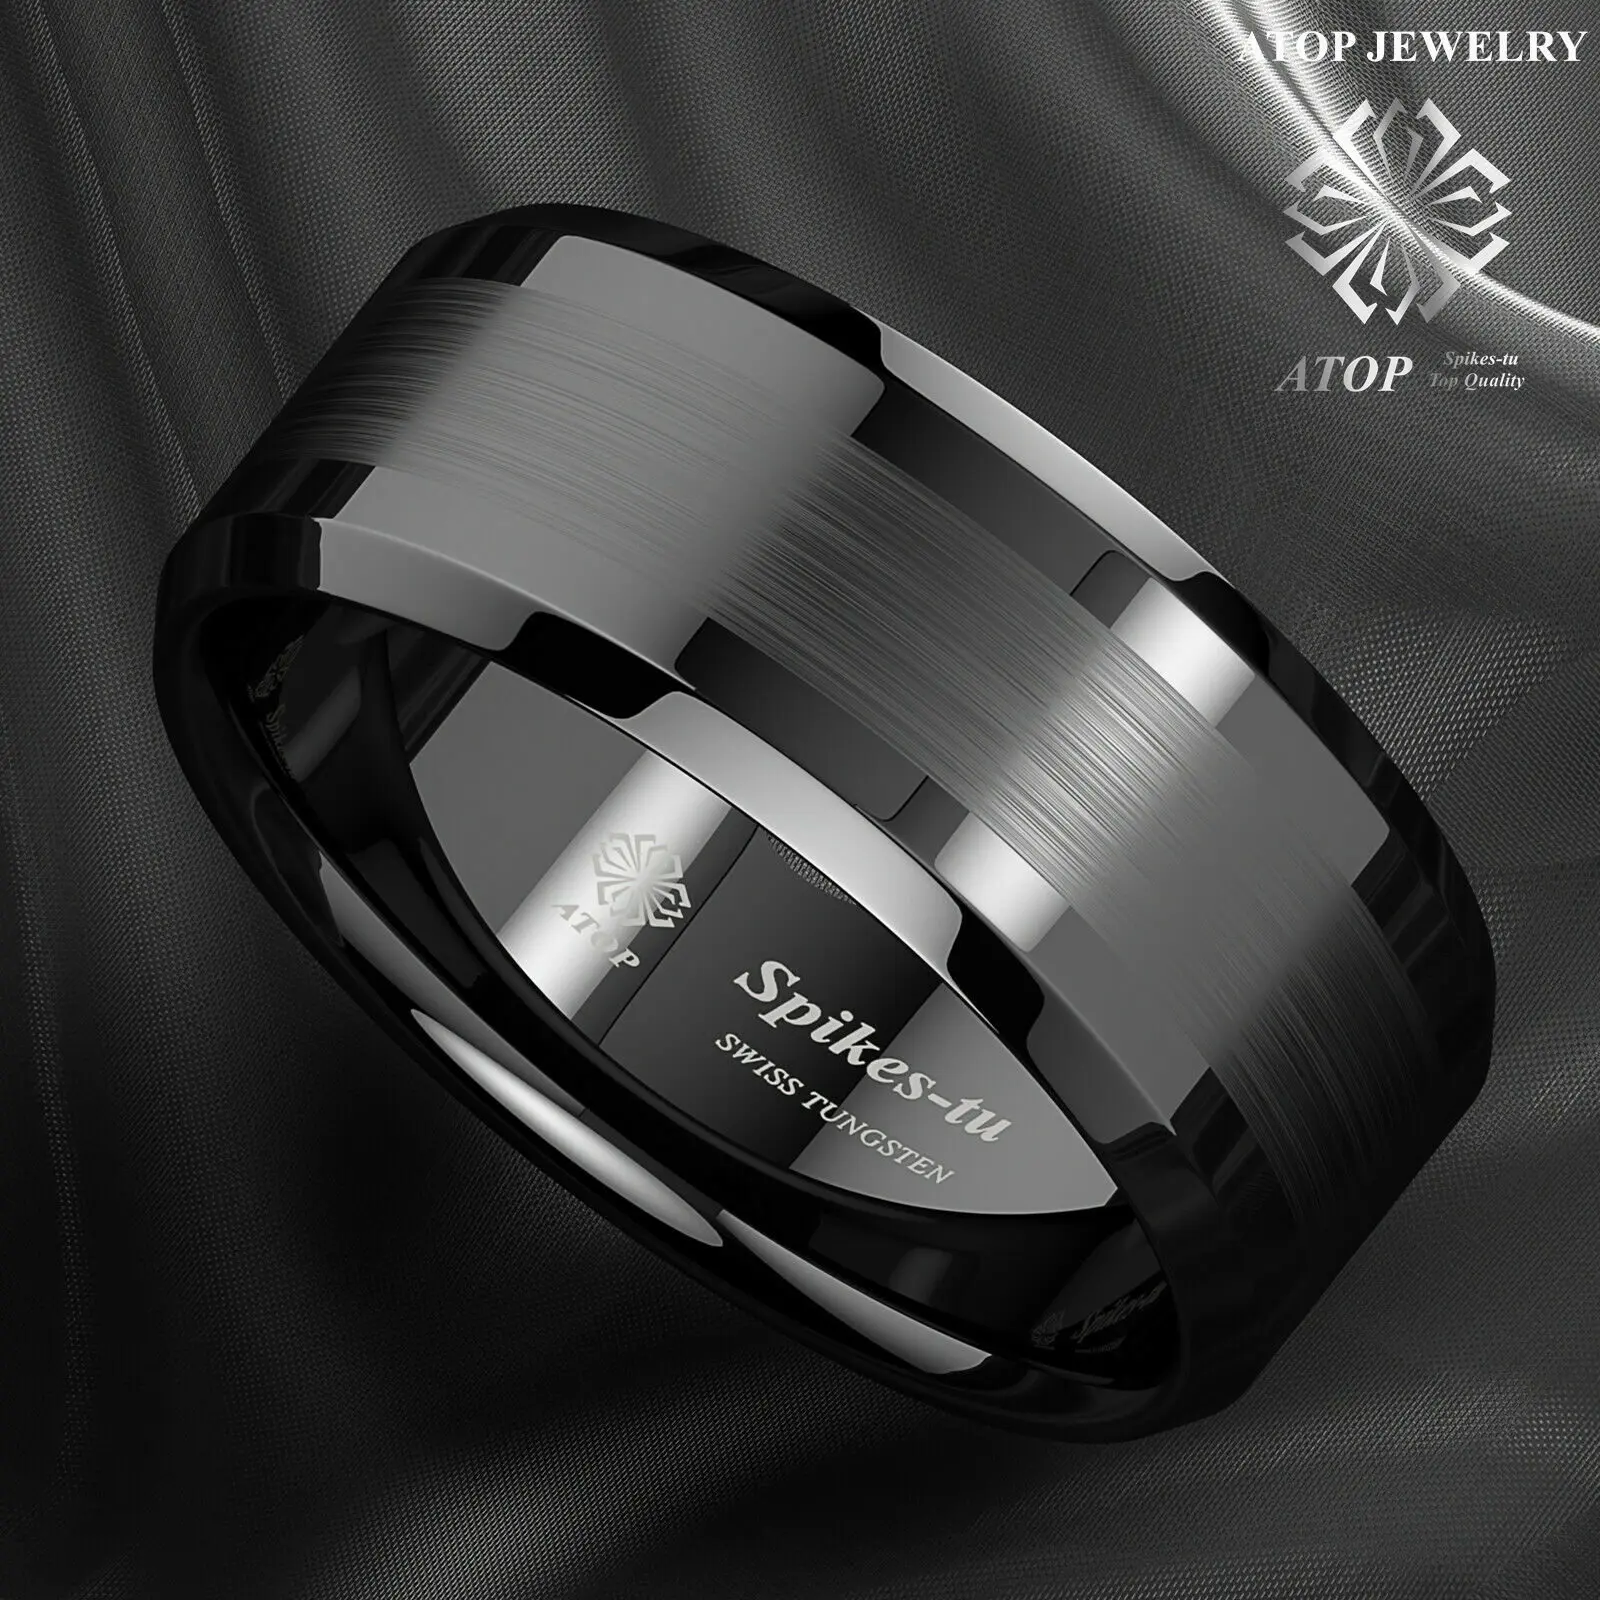 8mm Tungsten Carbide Ring Classic Black Silver Brushed Wedding Band ATOP Jewelry 